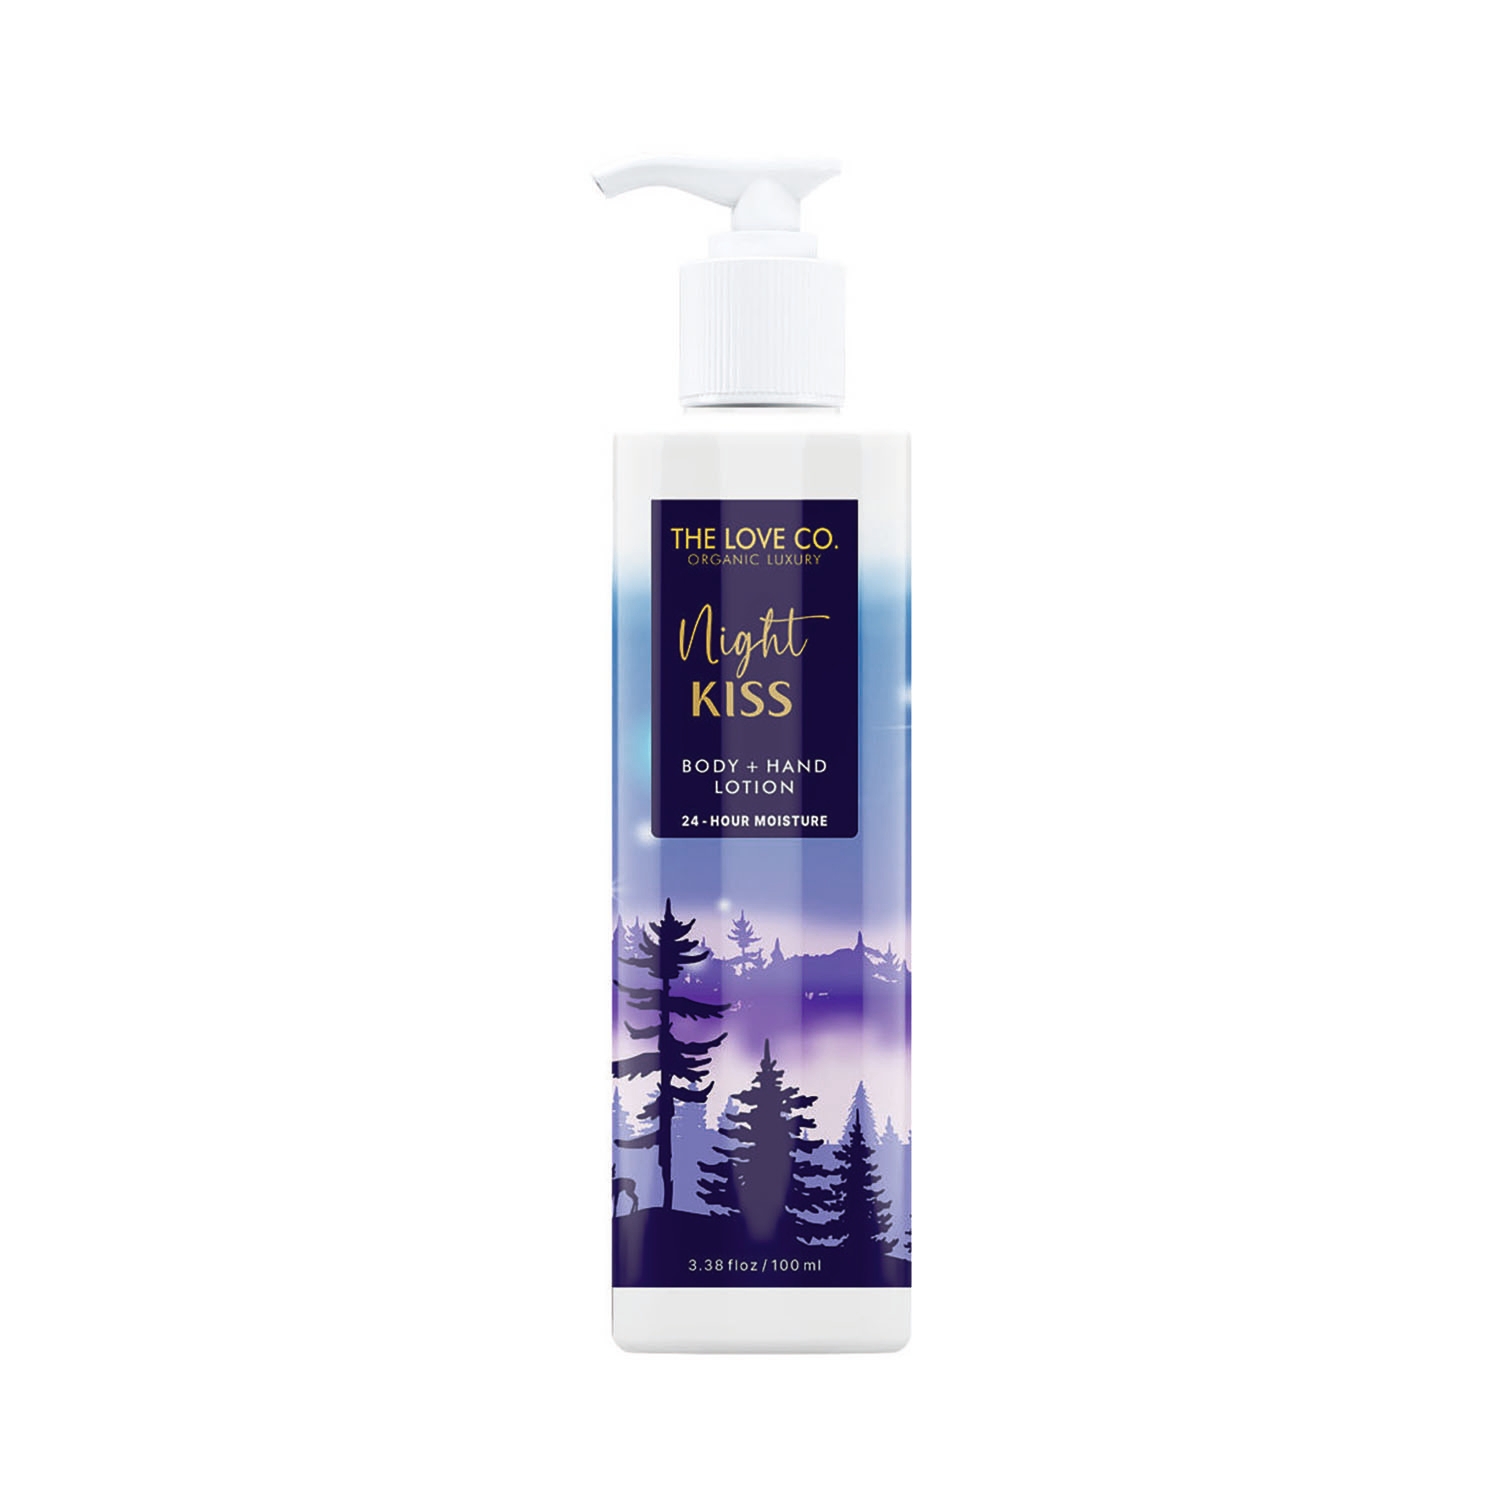 THE LOVE CO. | THE LOVE CO. Night Kiss Hand & Body Lotion Daily Skin Moisture (100ml)